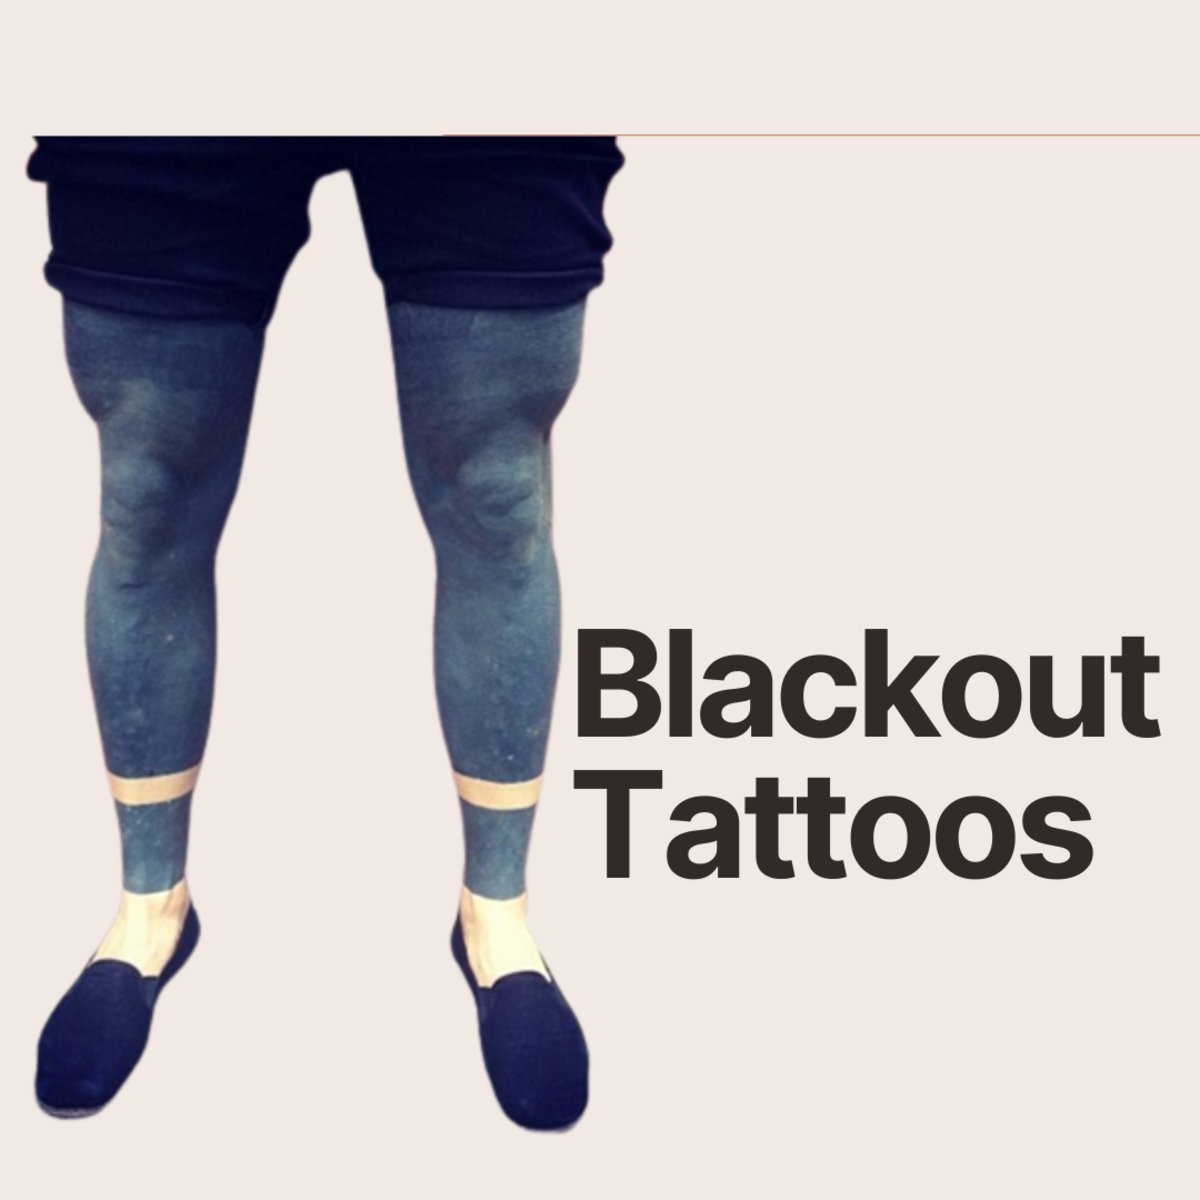 Blackout Tattoos: Why People Choose This Striking Body Modification